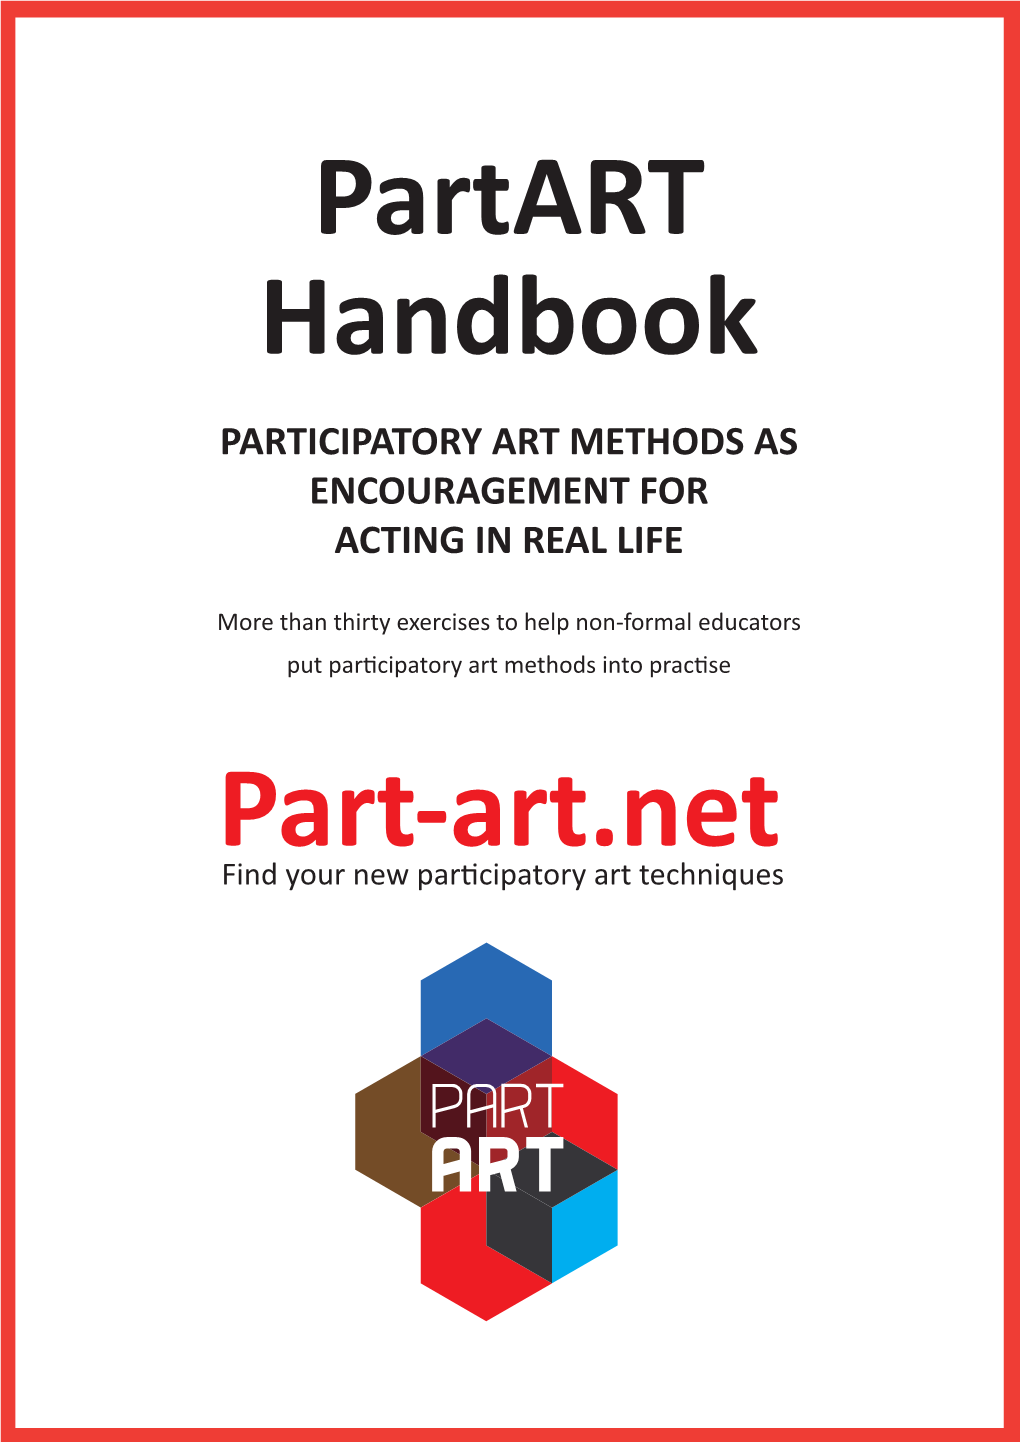 Participatory Art Methods As Encouragement for Acting in Real Life